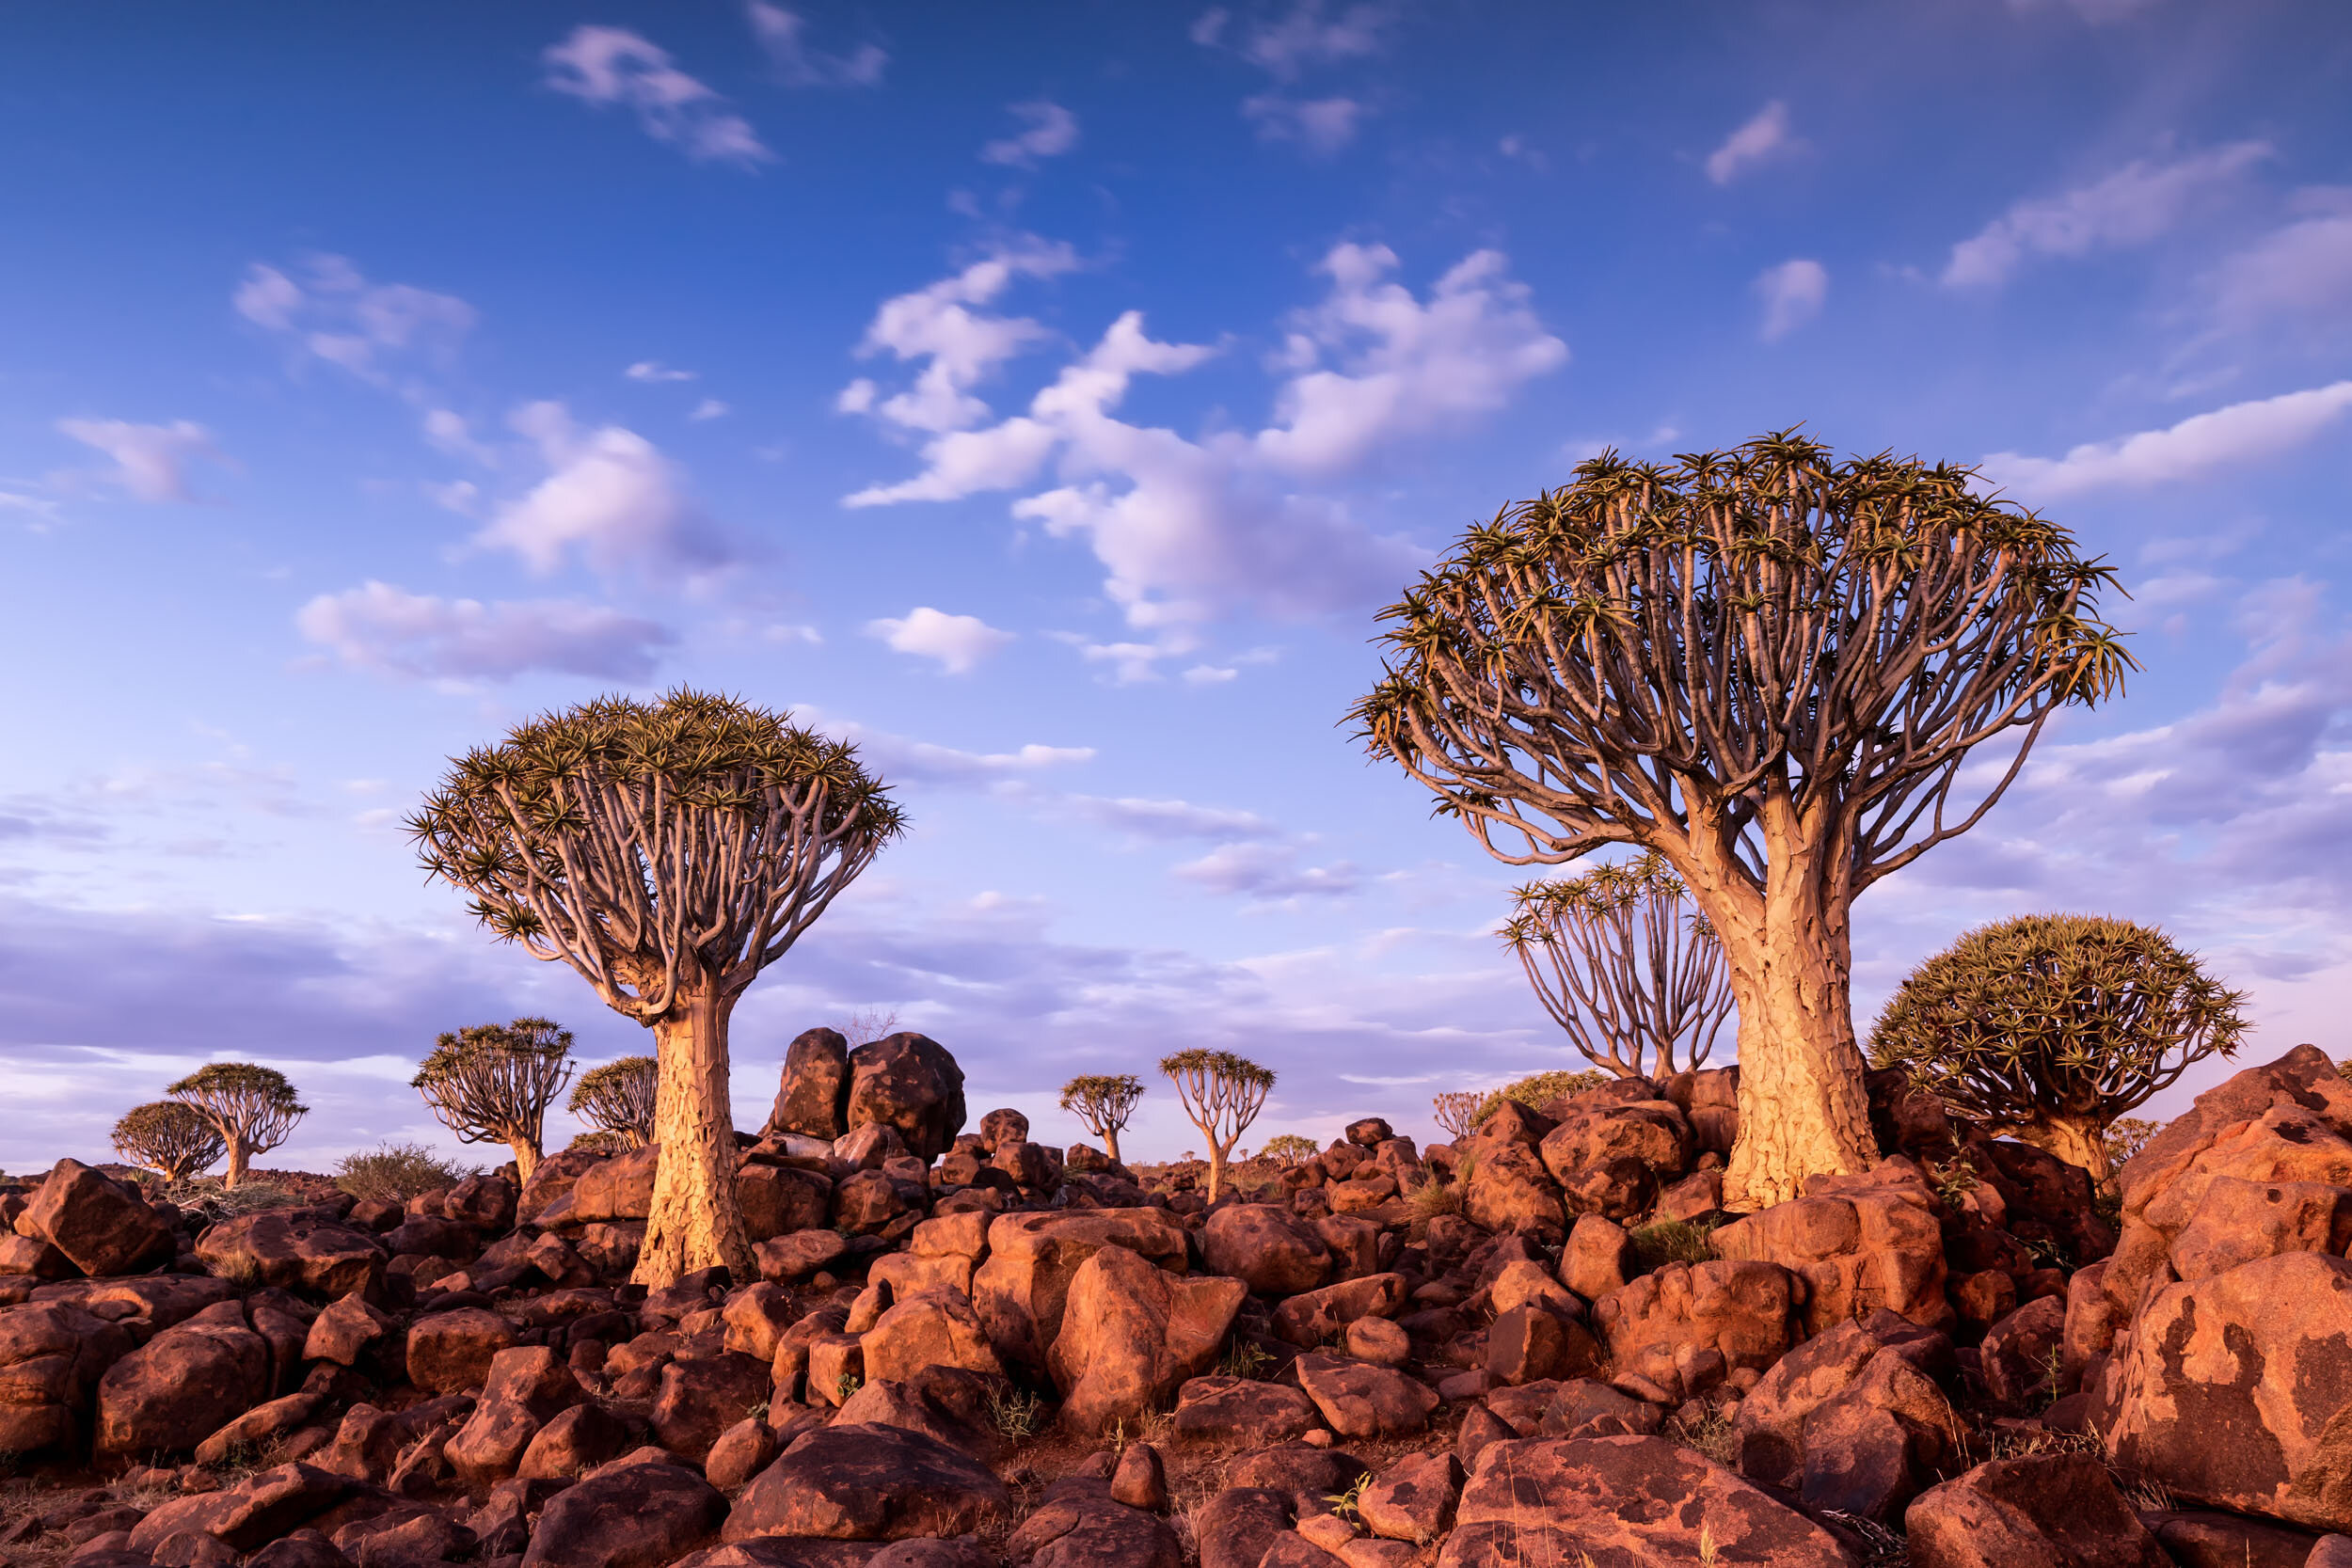  Lovely cloudy sky over a pair of trees in Namibia. 